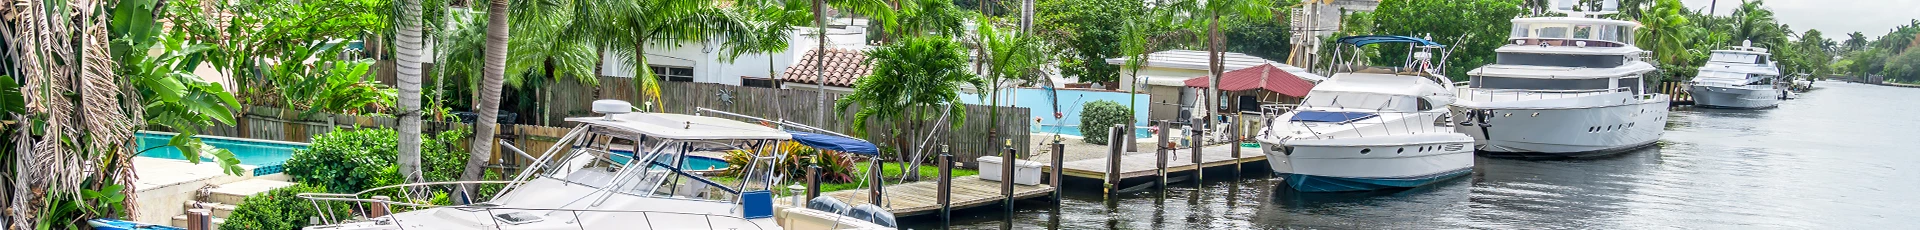 Boat Removal, Dismantle and Disposal in Harbor Bluffs Florida